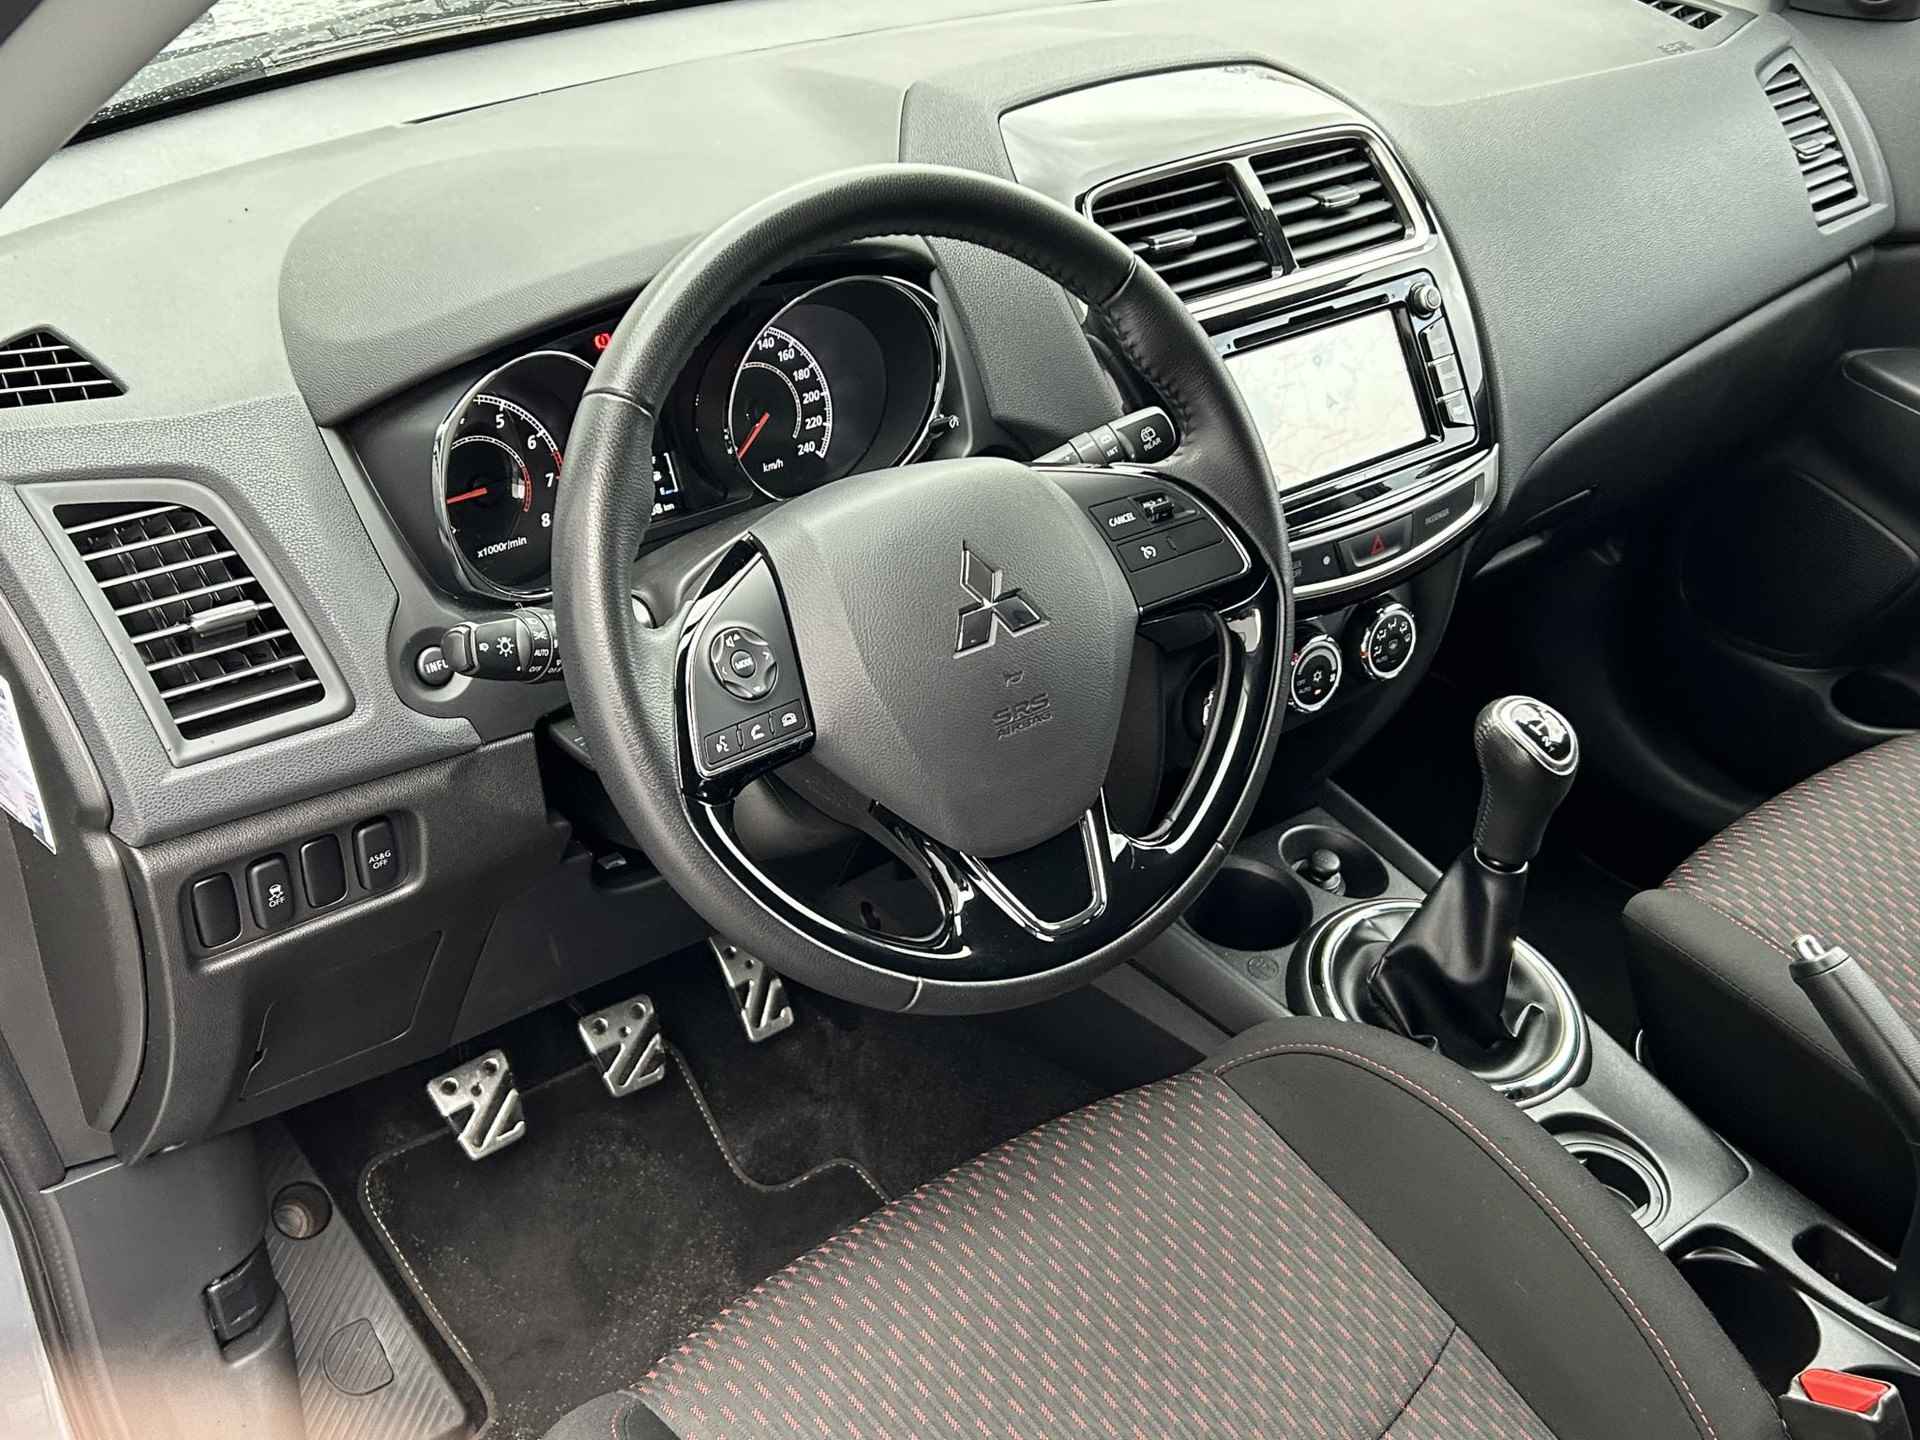 Mitsubishi ASX 1.6 Cleartec Connect Pro / Achteruitrijcamera / Trekhaak / Cruise control / Apple Carplay/Android Auto / INCLUSIEF WINTERSET - 15/36